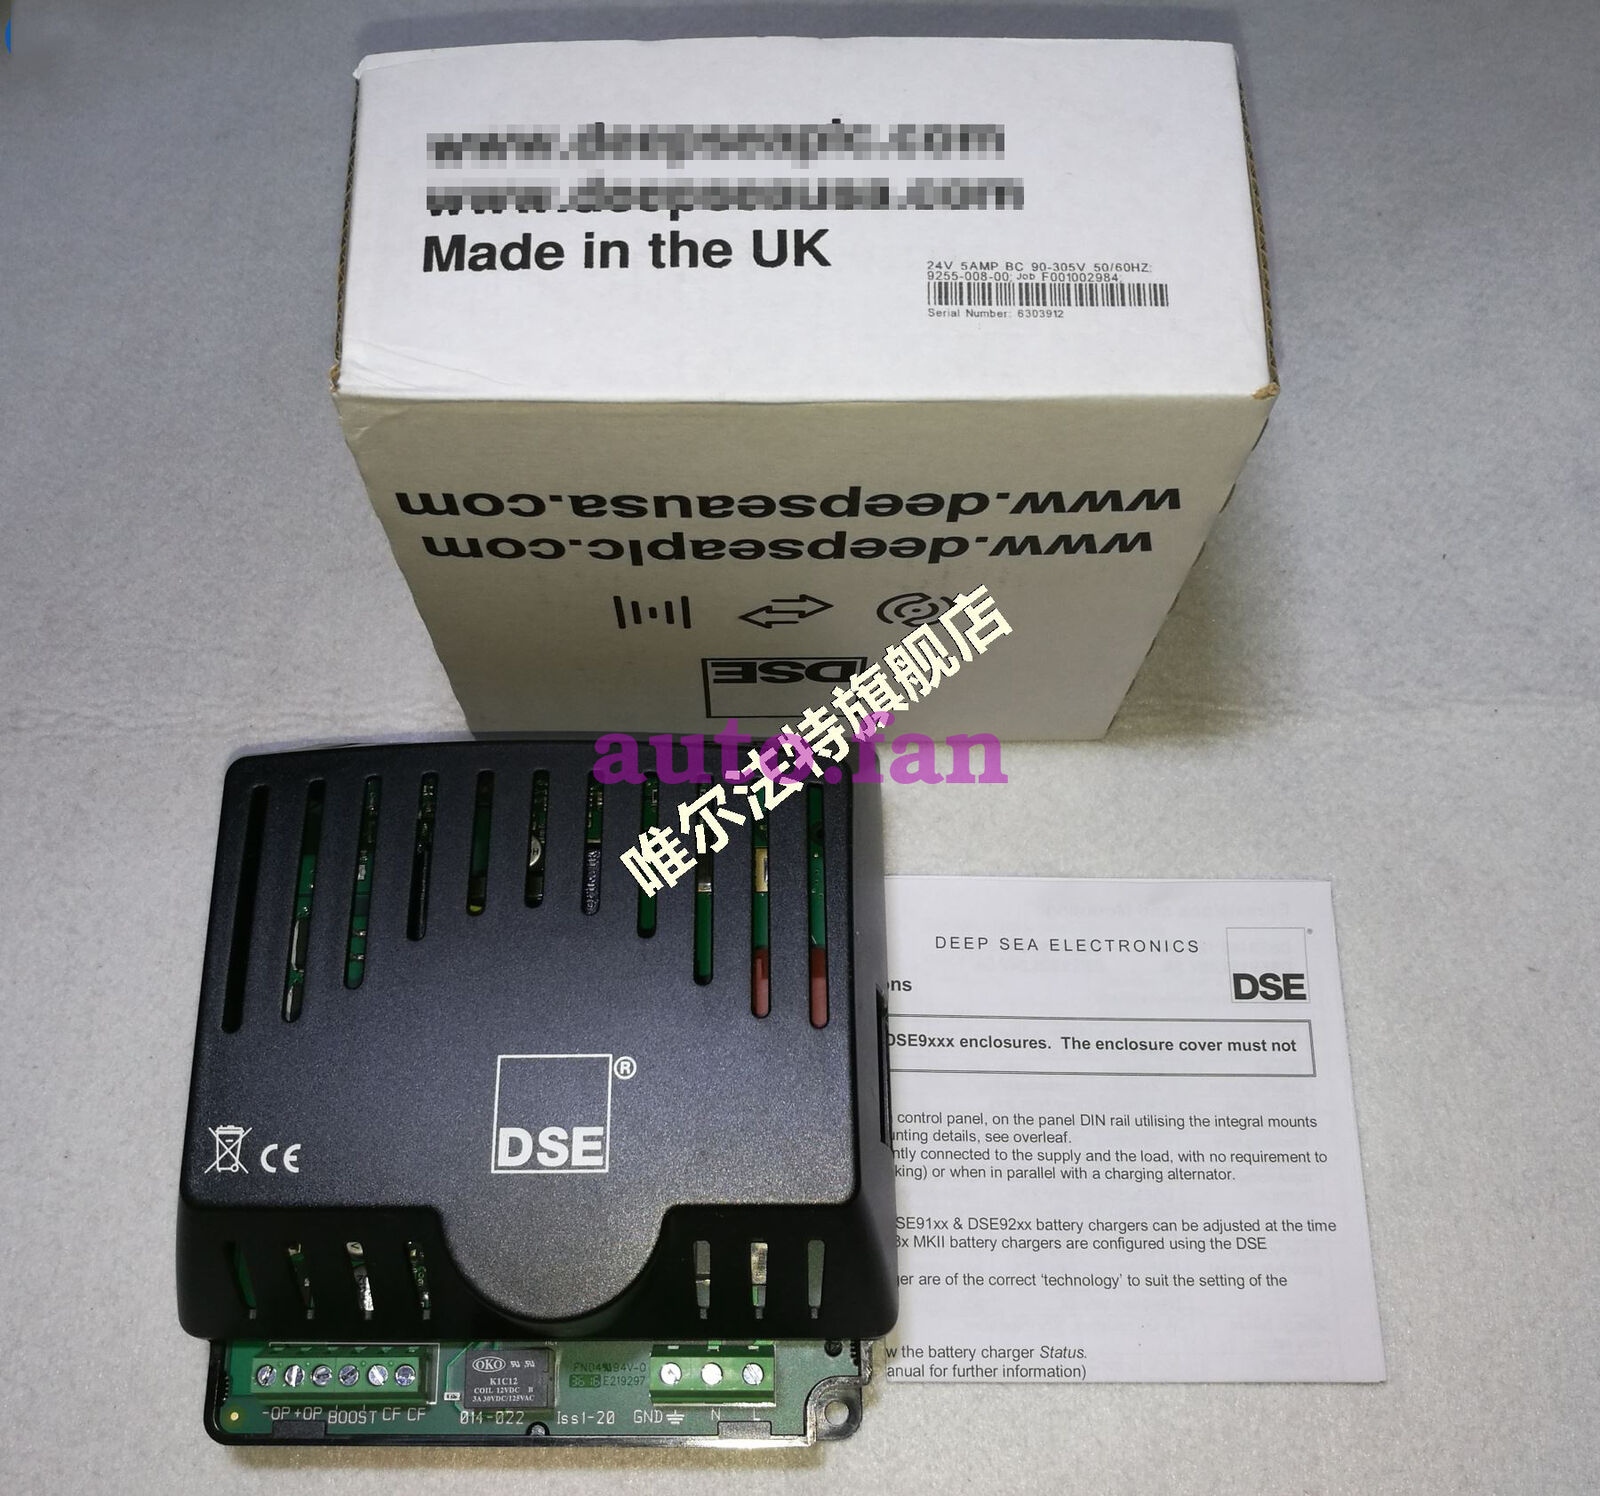 Applicable for DSE9255 deep sea charger, 24V5A auxiliary charger